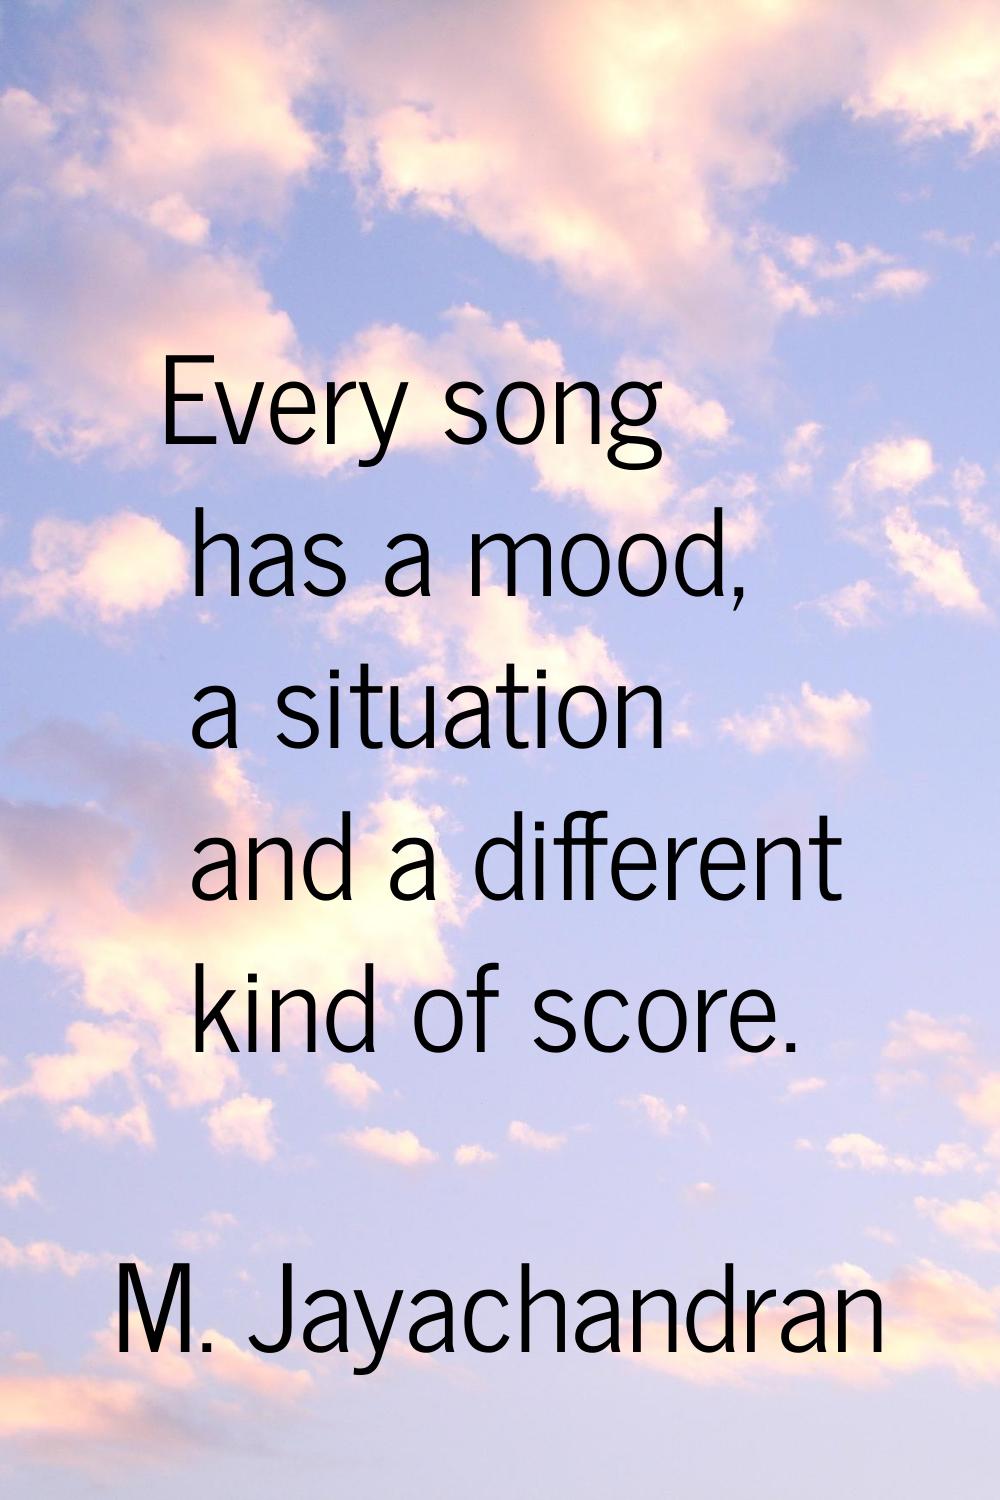 Every song has a mood, a situation and a different kind of score.